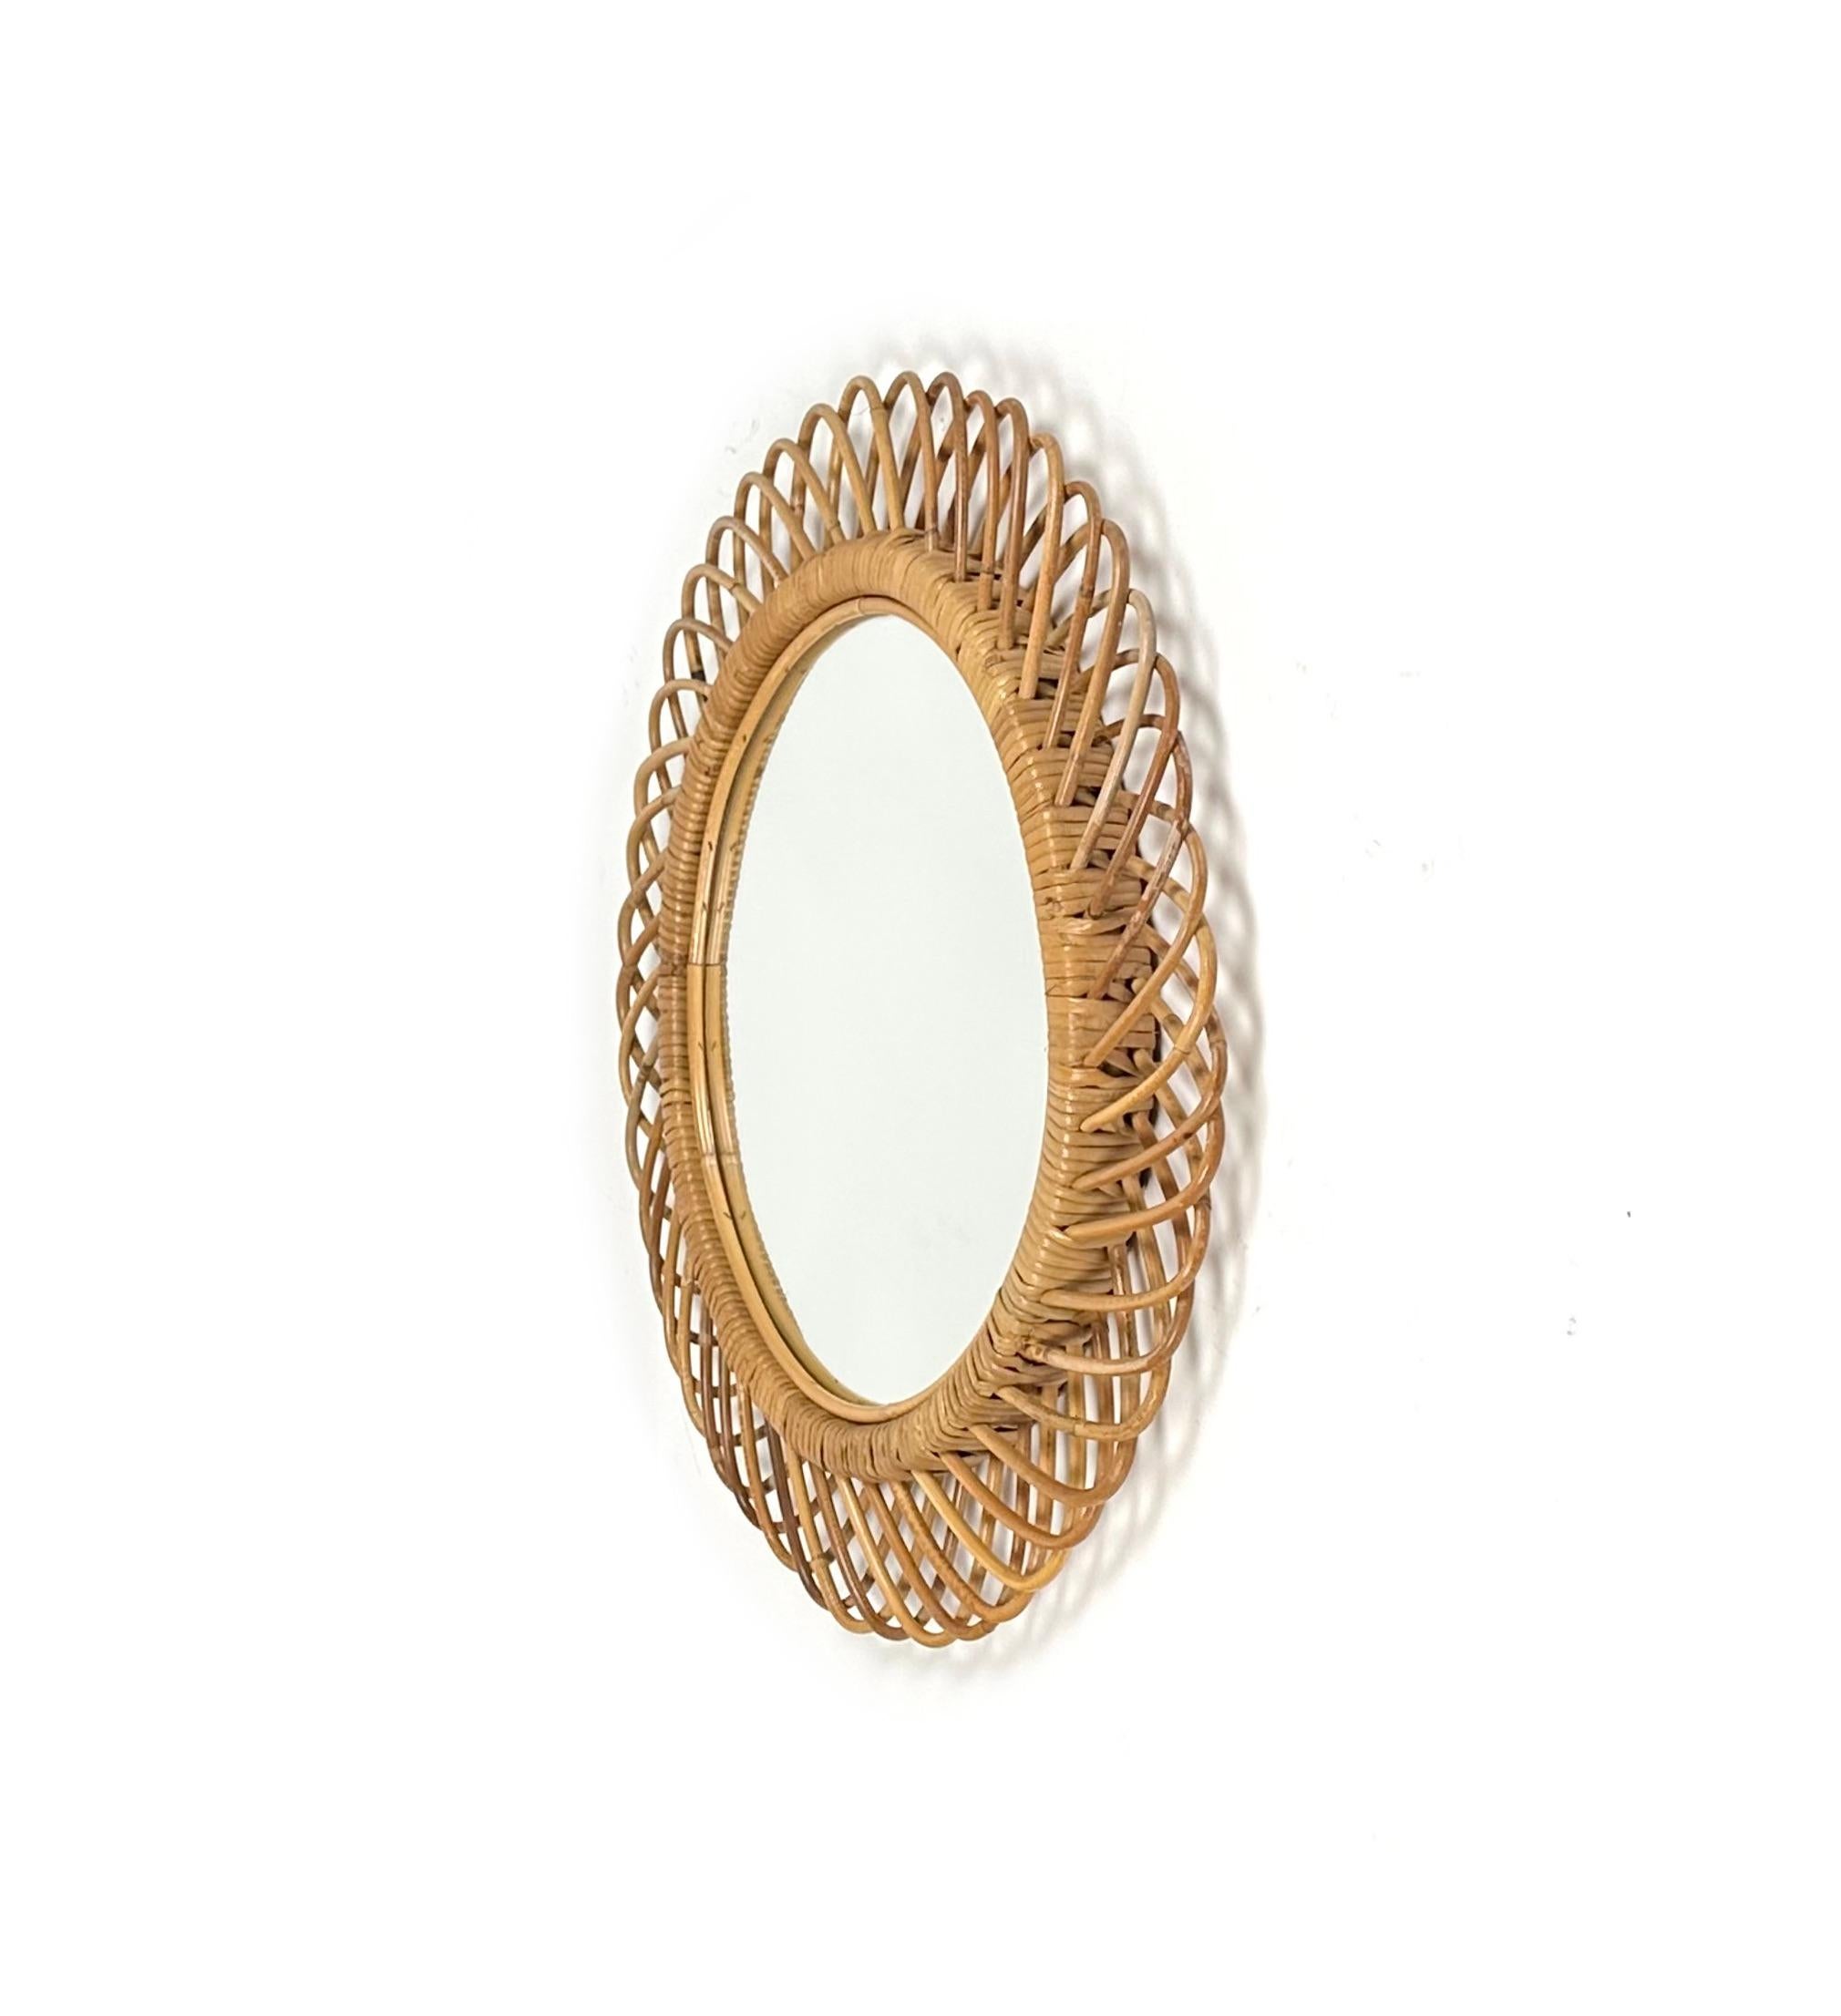 Mid-20th Century Midcentury Rattan and Bamboo Round Wall Mirror, Italy, 1960s For Sale